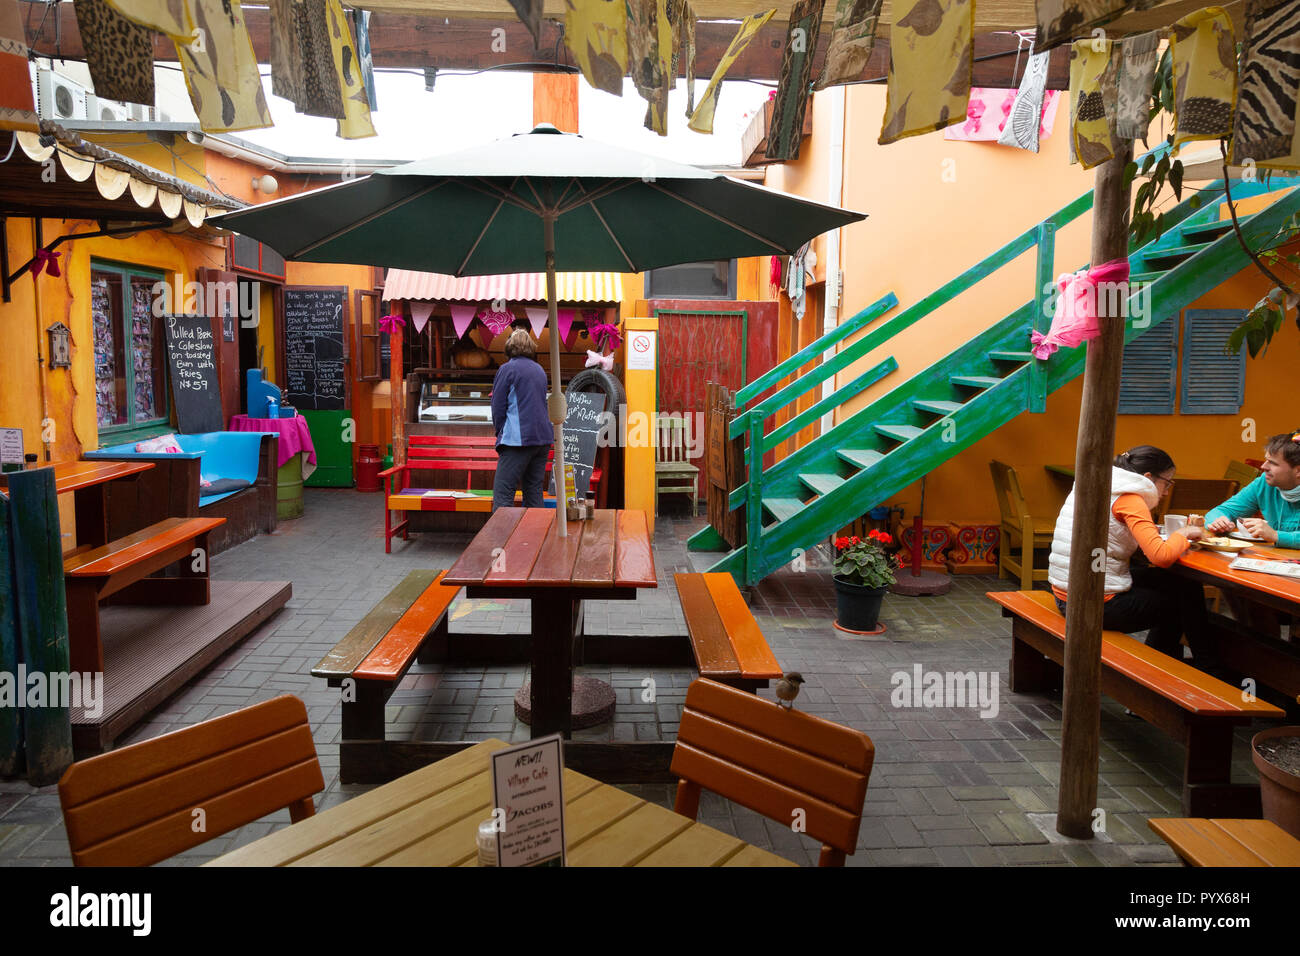 Swakopmund cafe -  people in a colourful cafe in the centre of Swakopmund, Namibia Africa Stock Photo